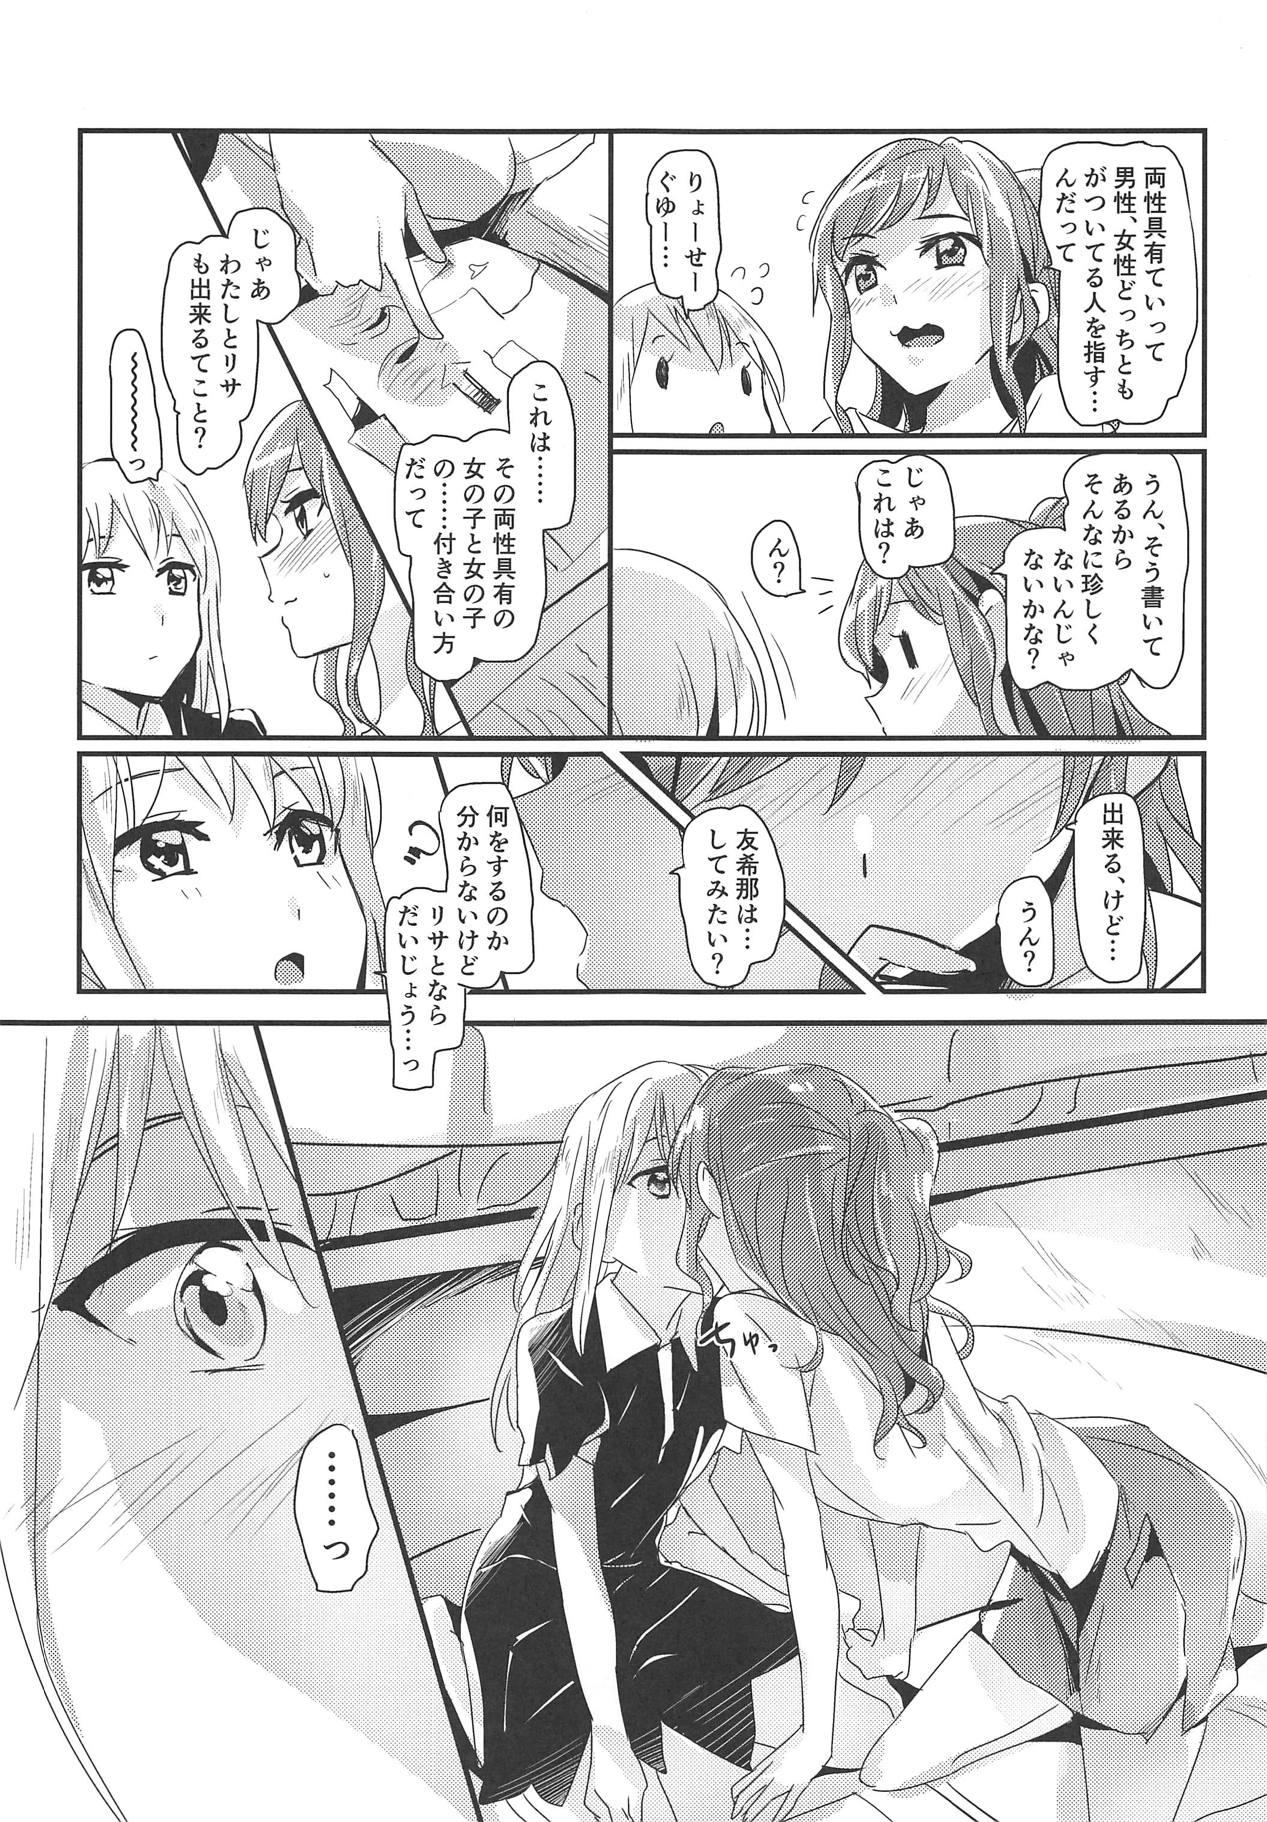 Old And Young Serenade - Bang dream Bubblebutt - Page 4